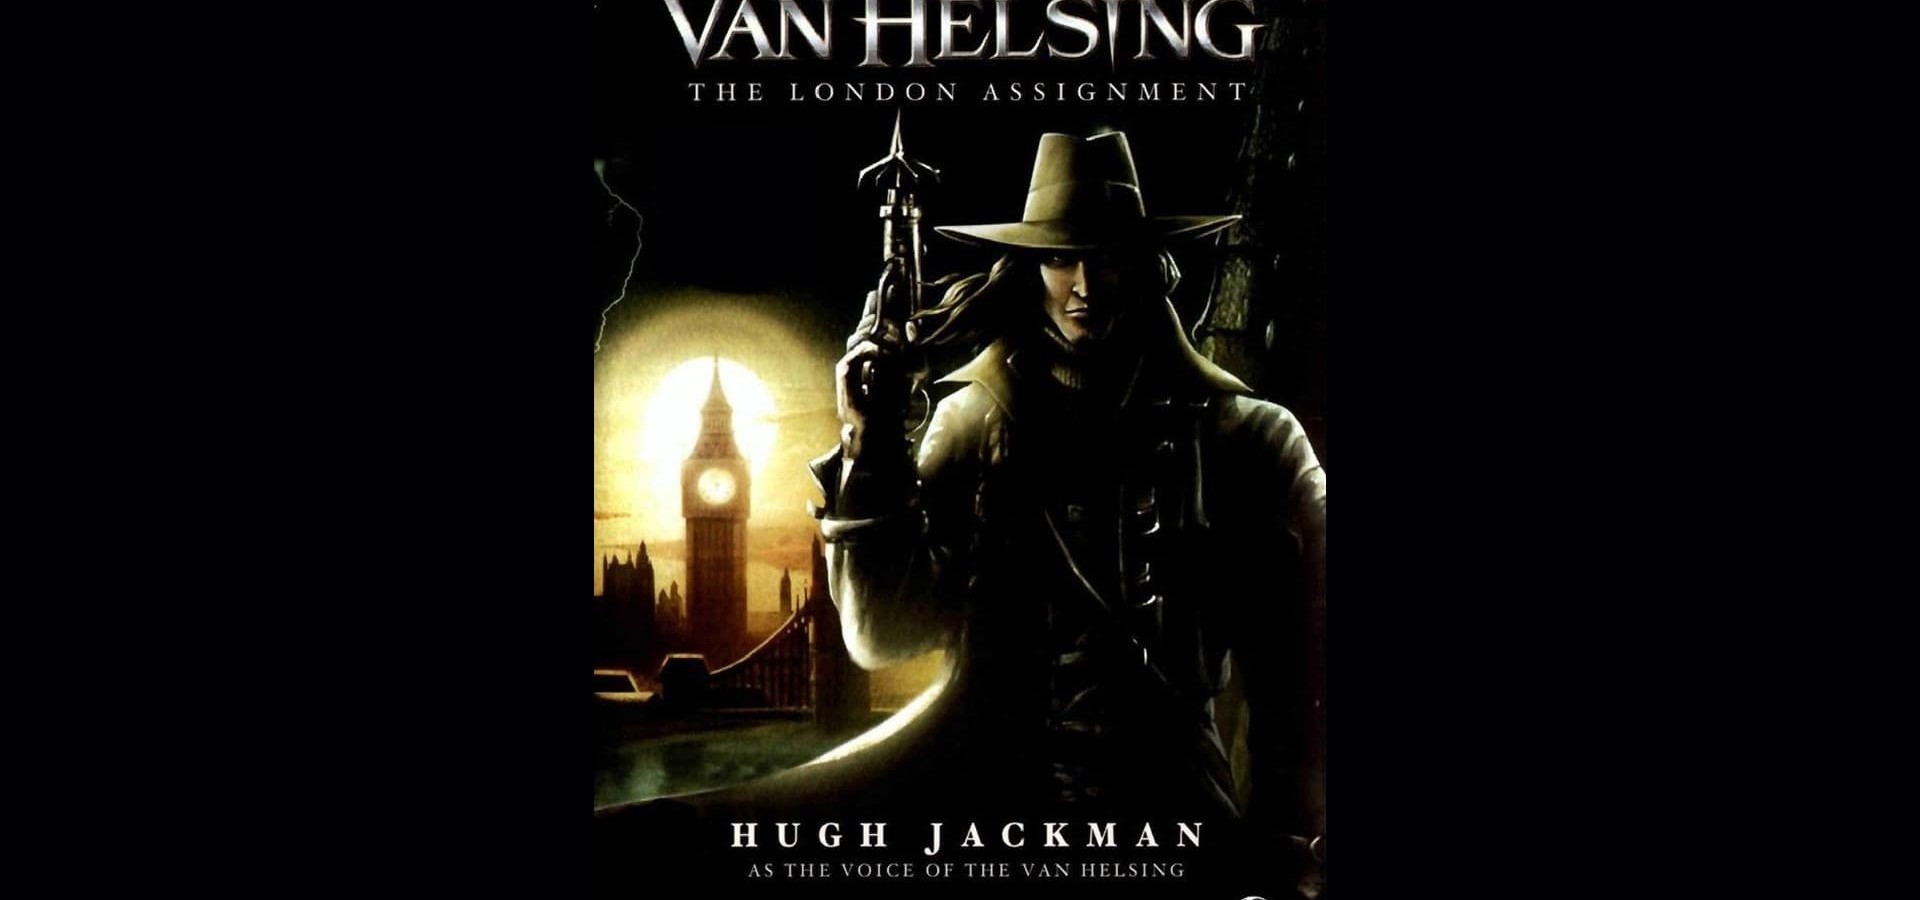 van helsing the london assignment full movie watch online free